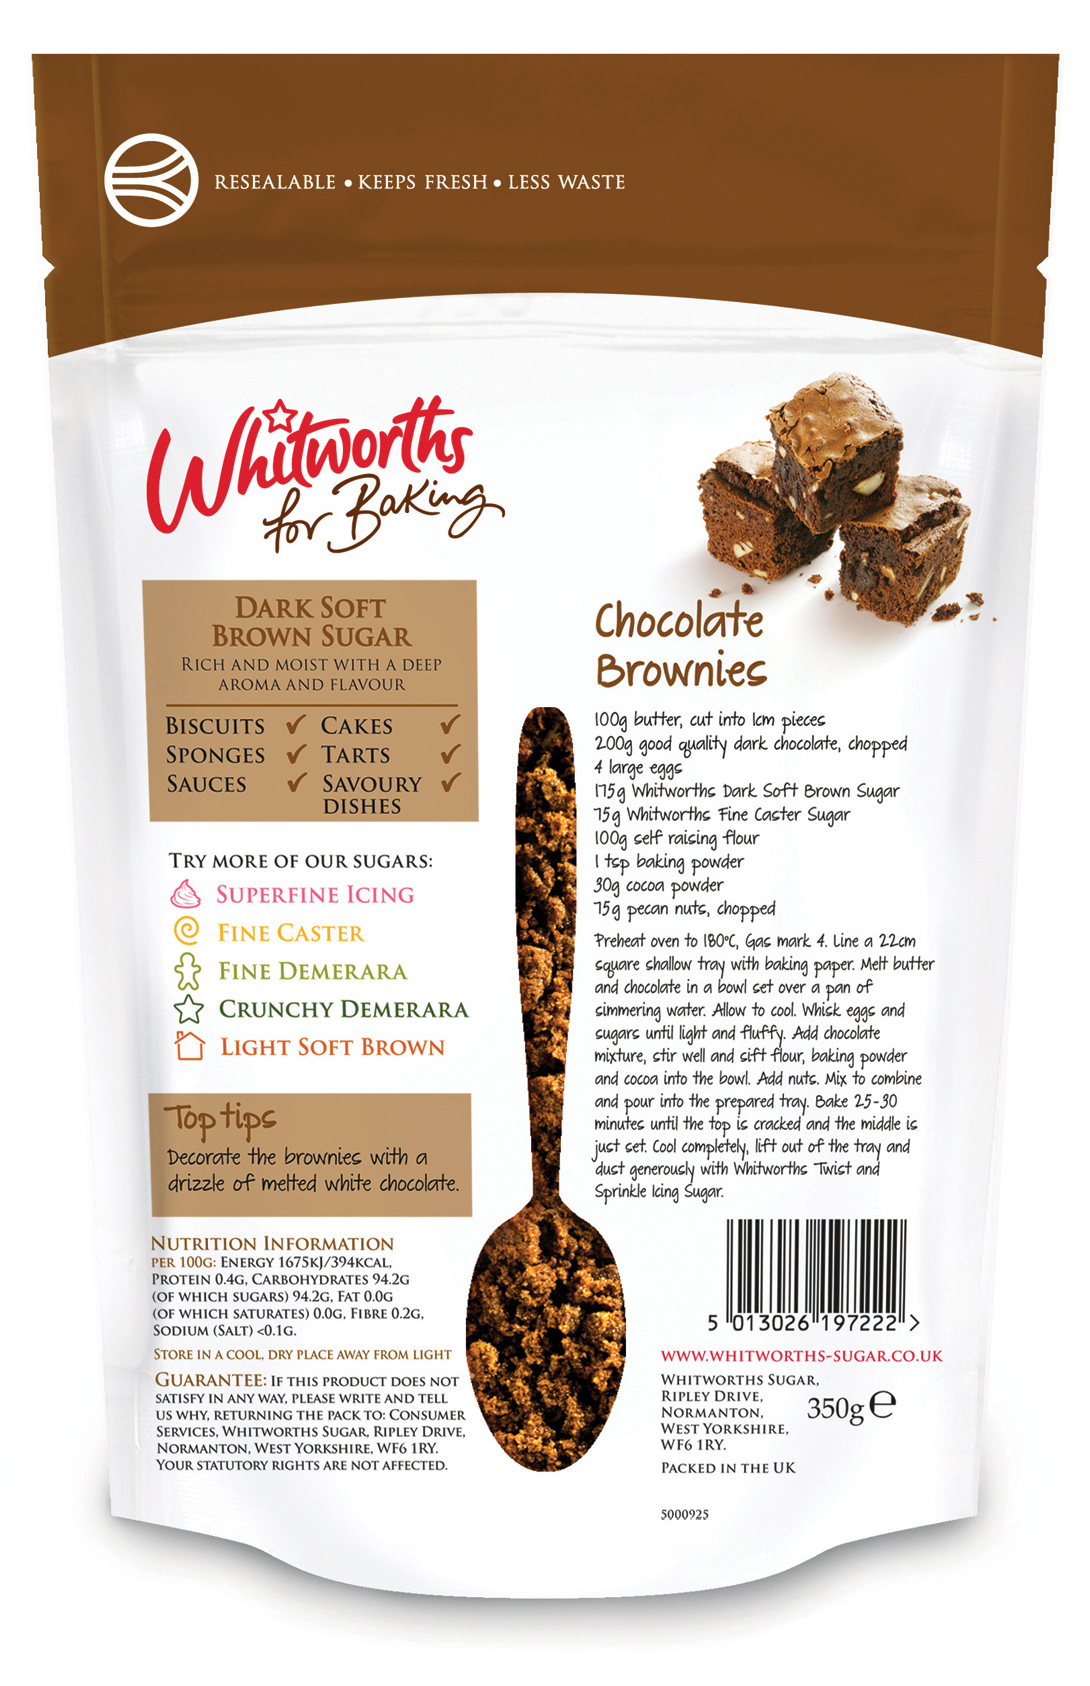 Packaging created by Leahy Brand Design for baking sugar brand Whitworths for Baking